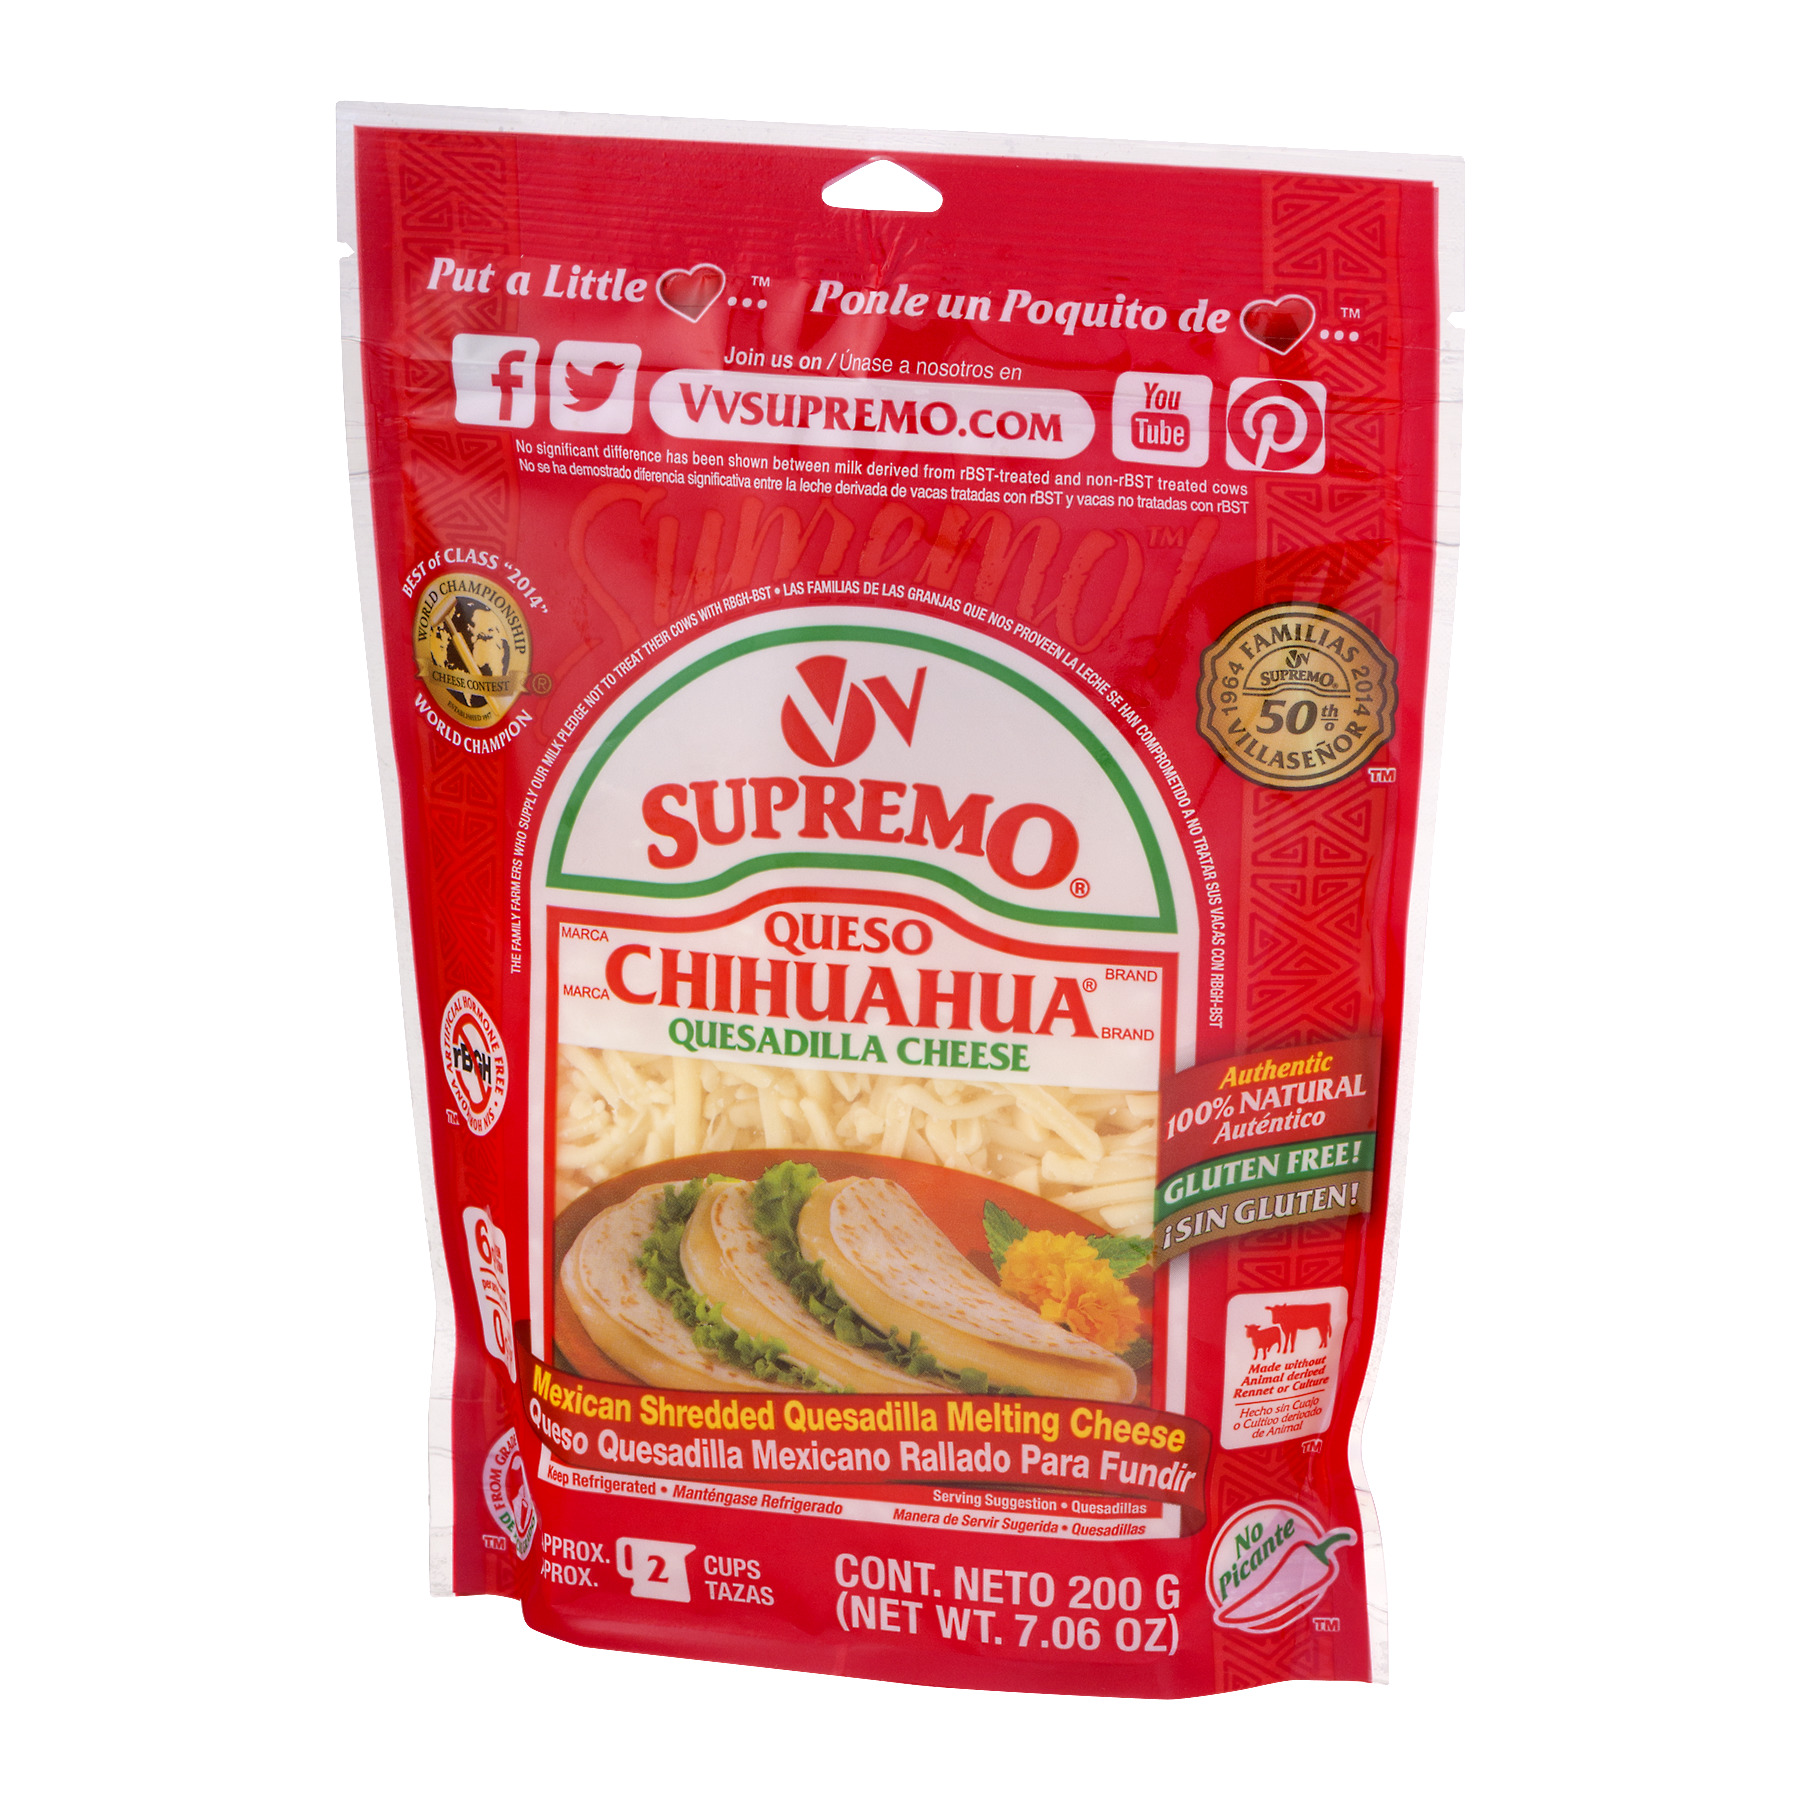 how healthy is chihuahua cheese? 2